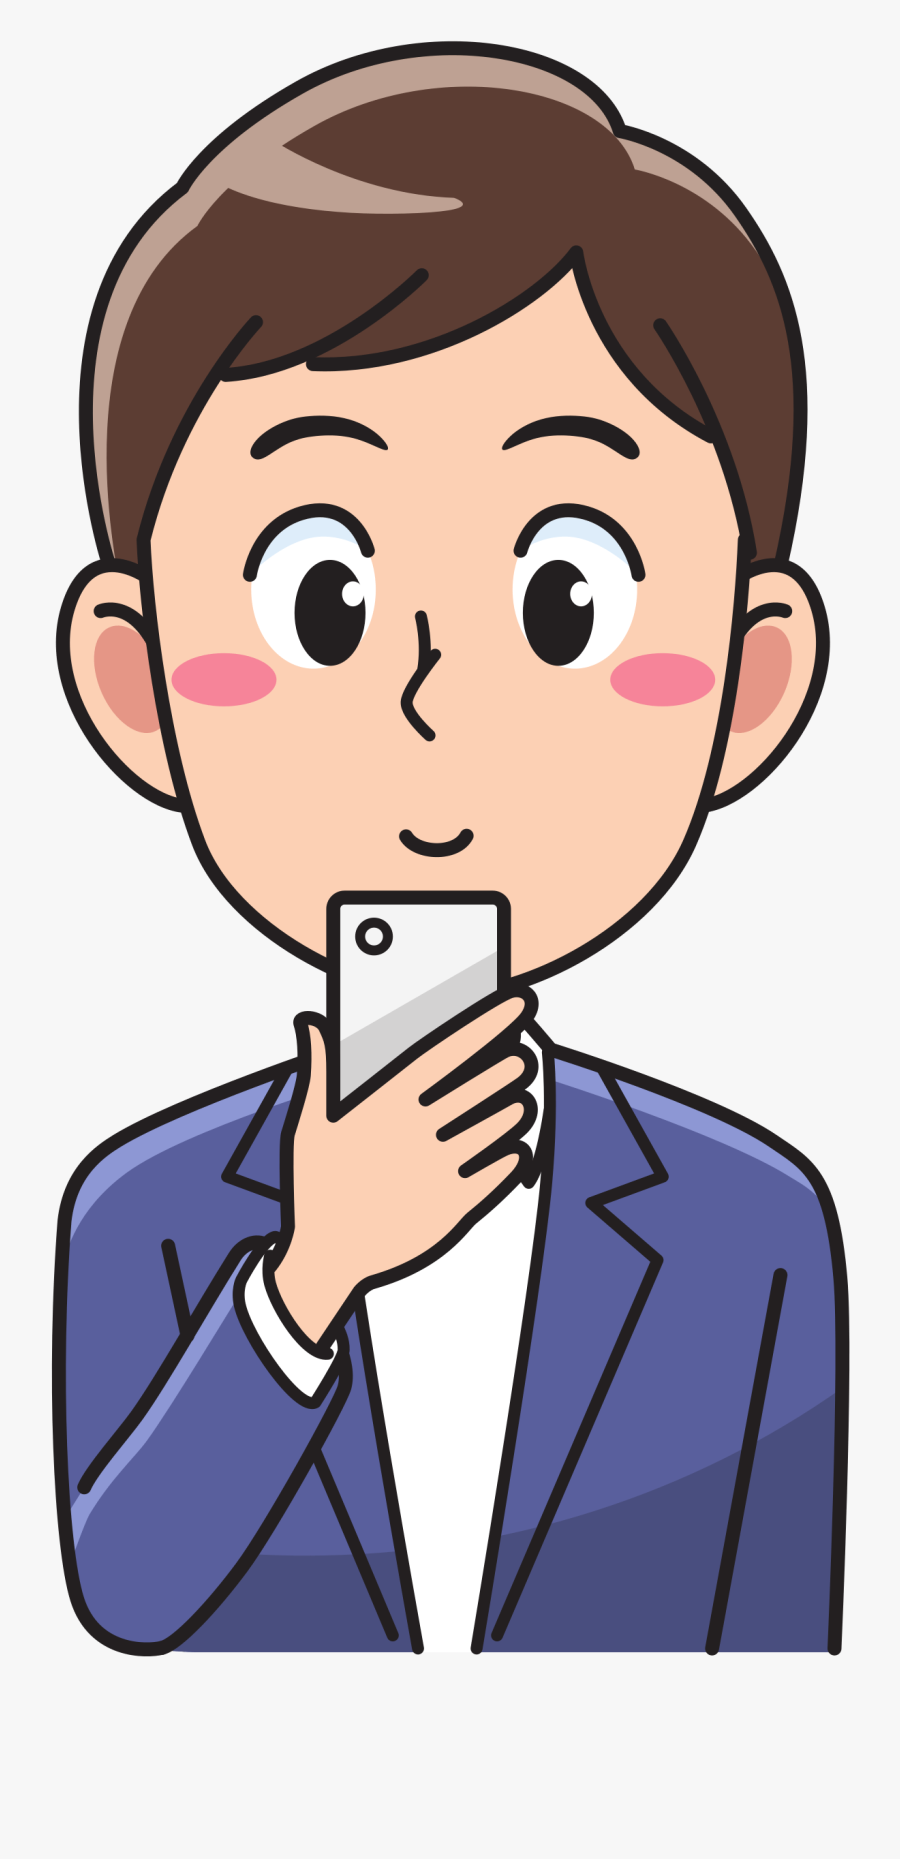 This Free Icons Png Design Of Man Using A Smartphone - Man Using Smartphone Png, Transparent Clipart